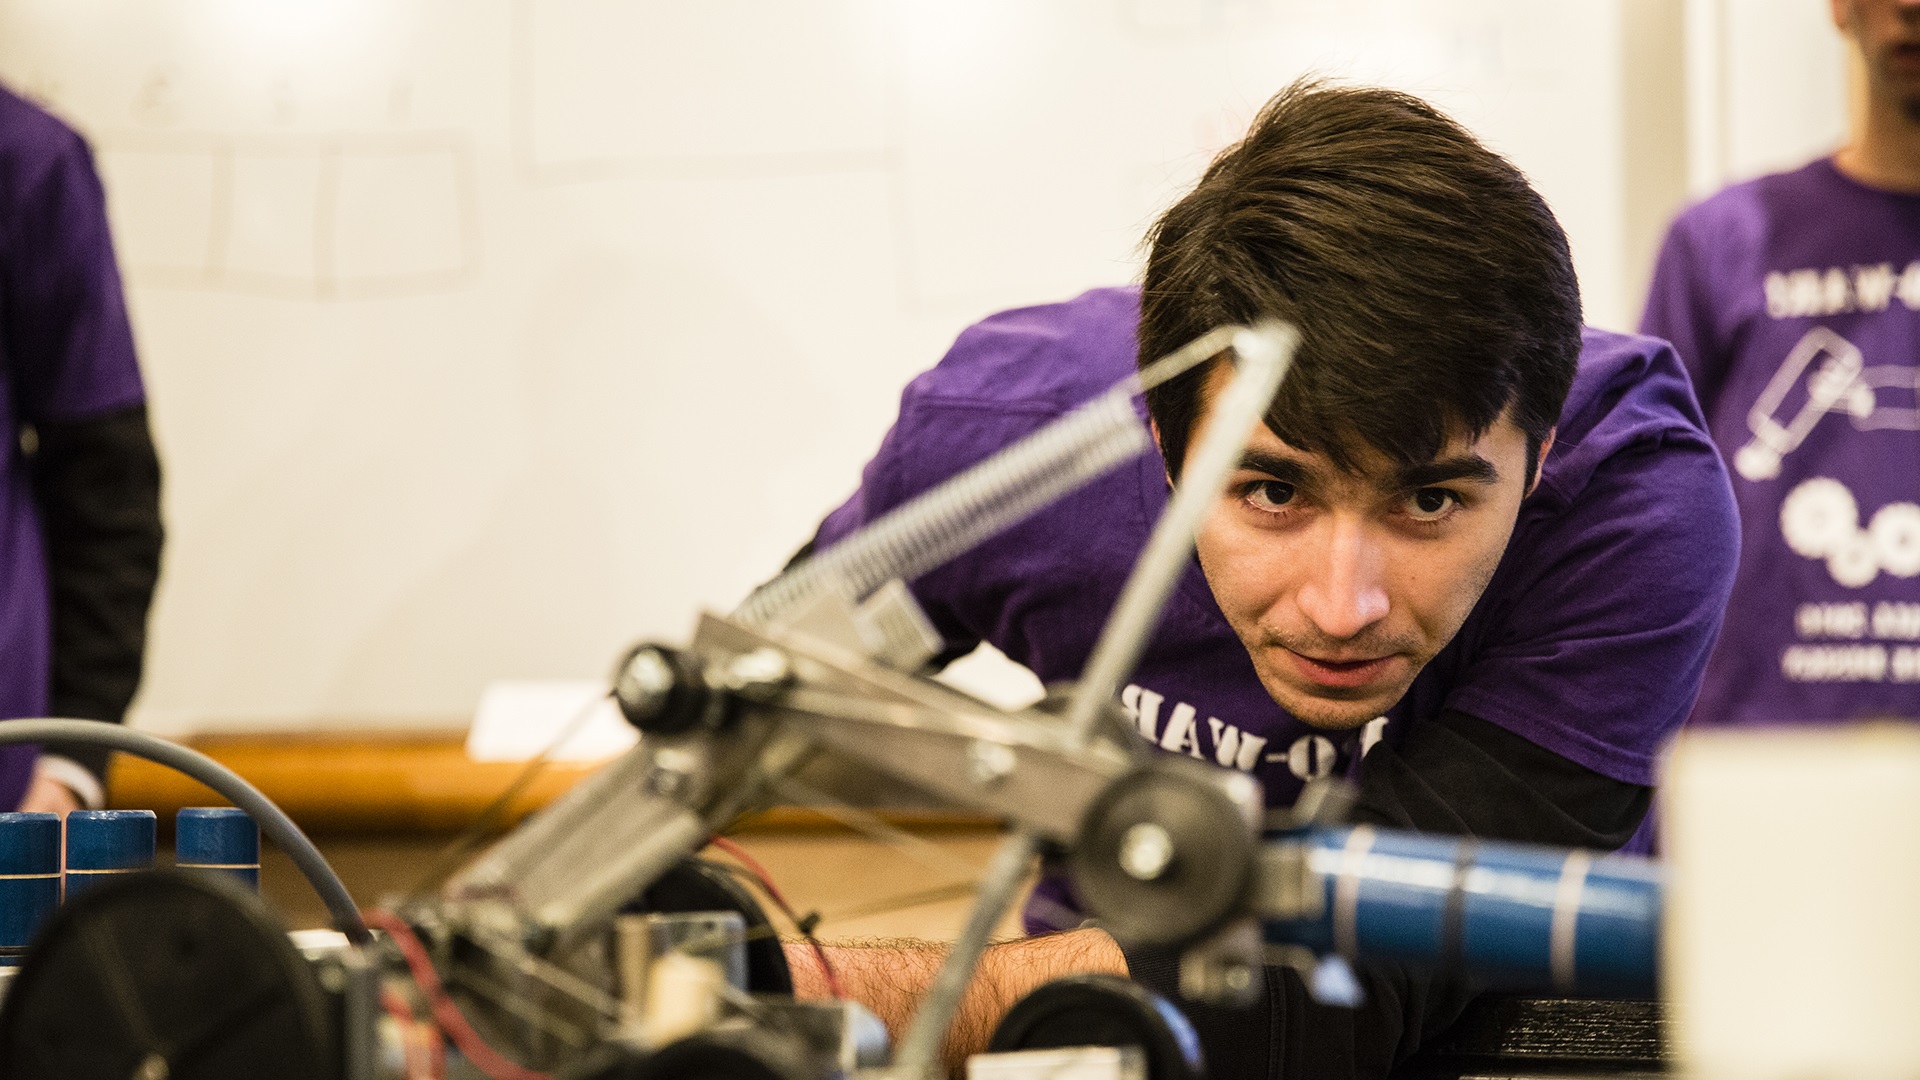 Engineering student concentrates during a machine design competition.